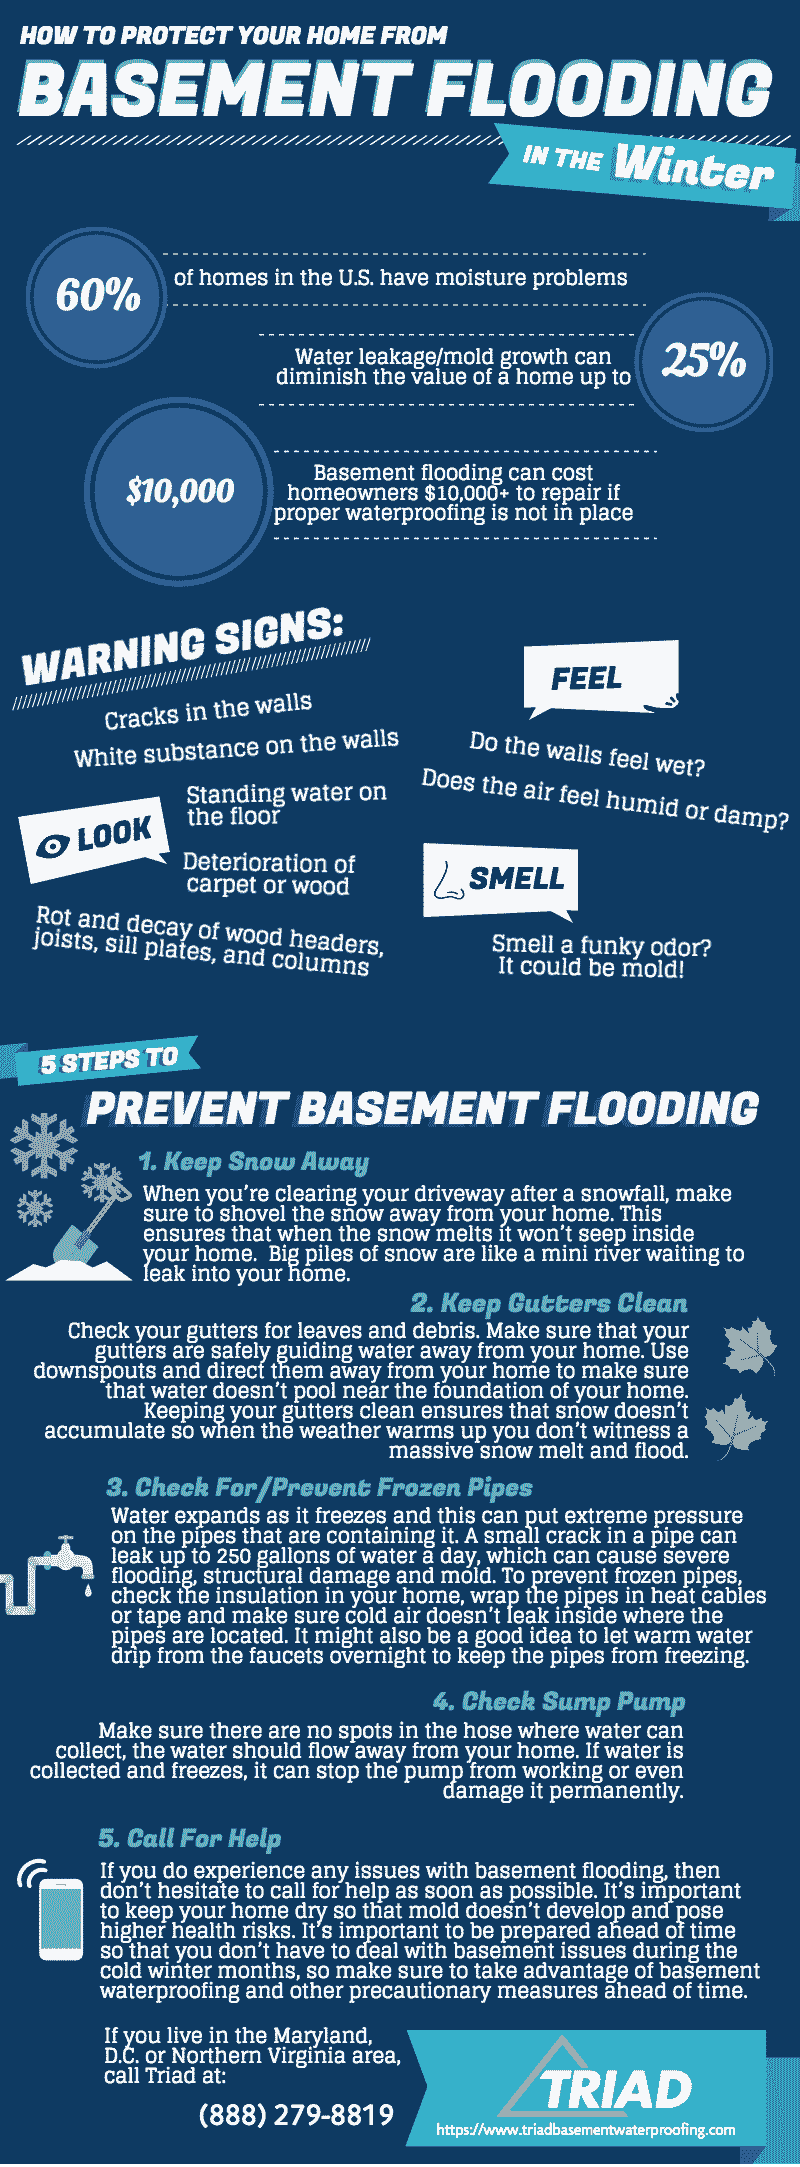 How To Protect Your Home From Basement Flooding